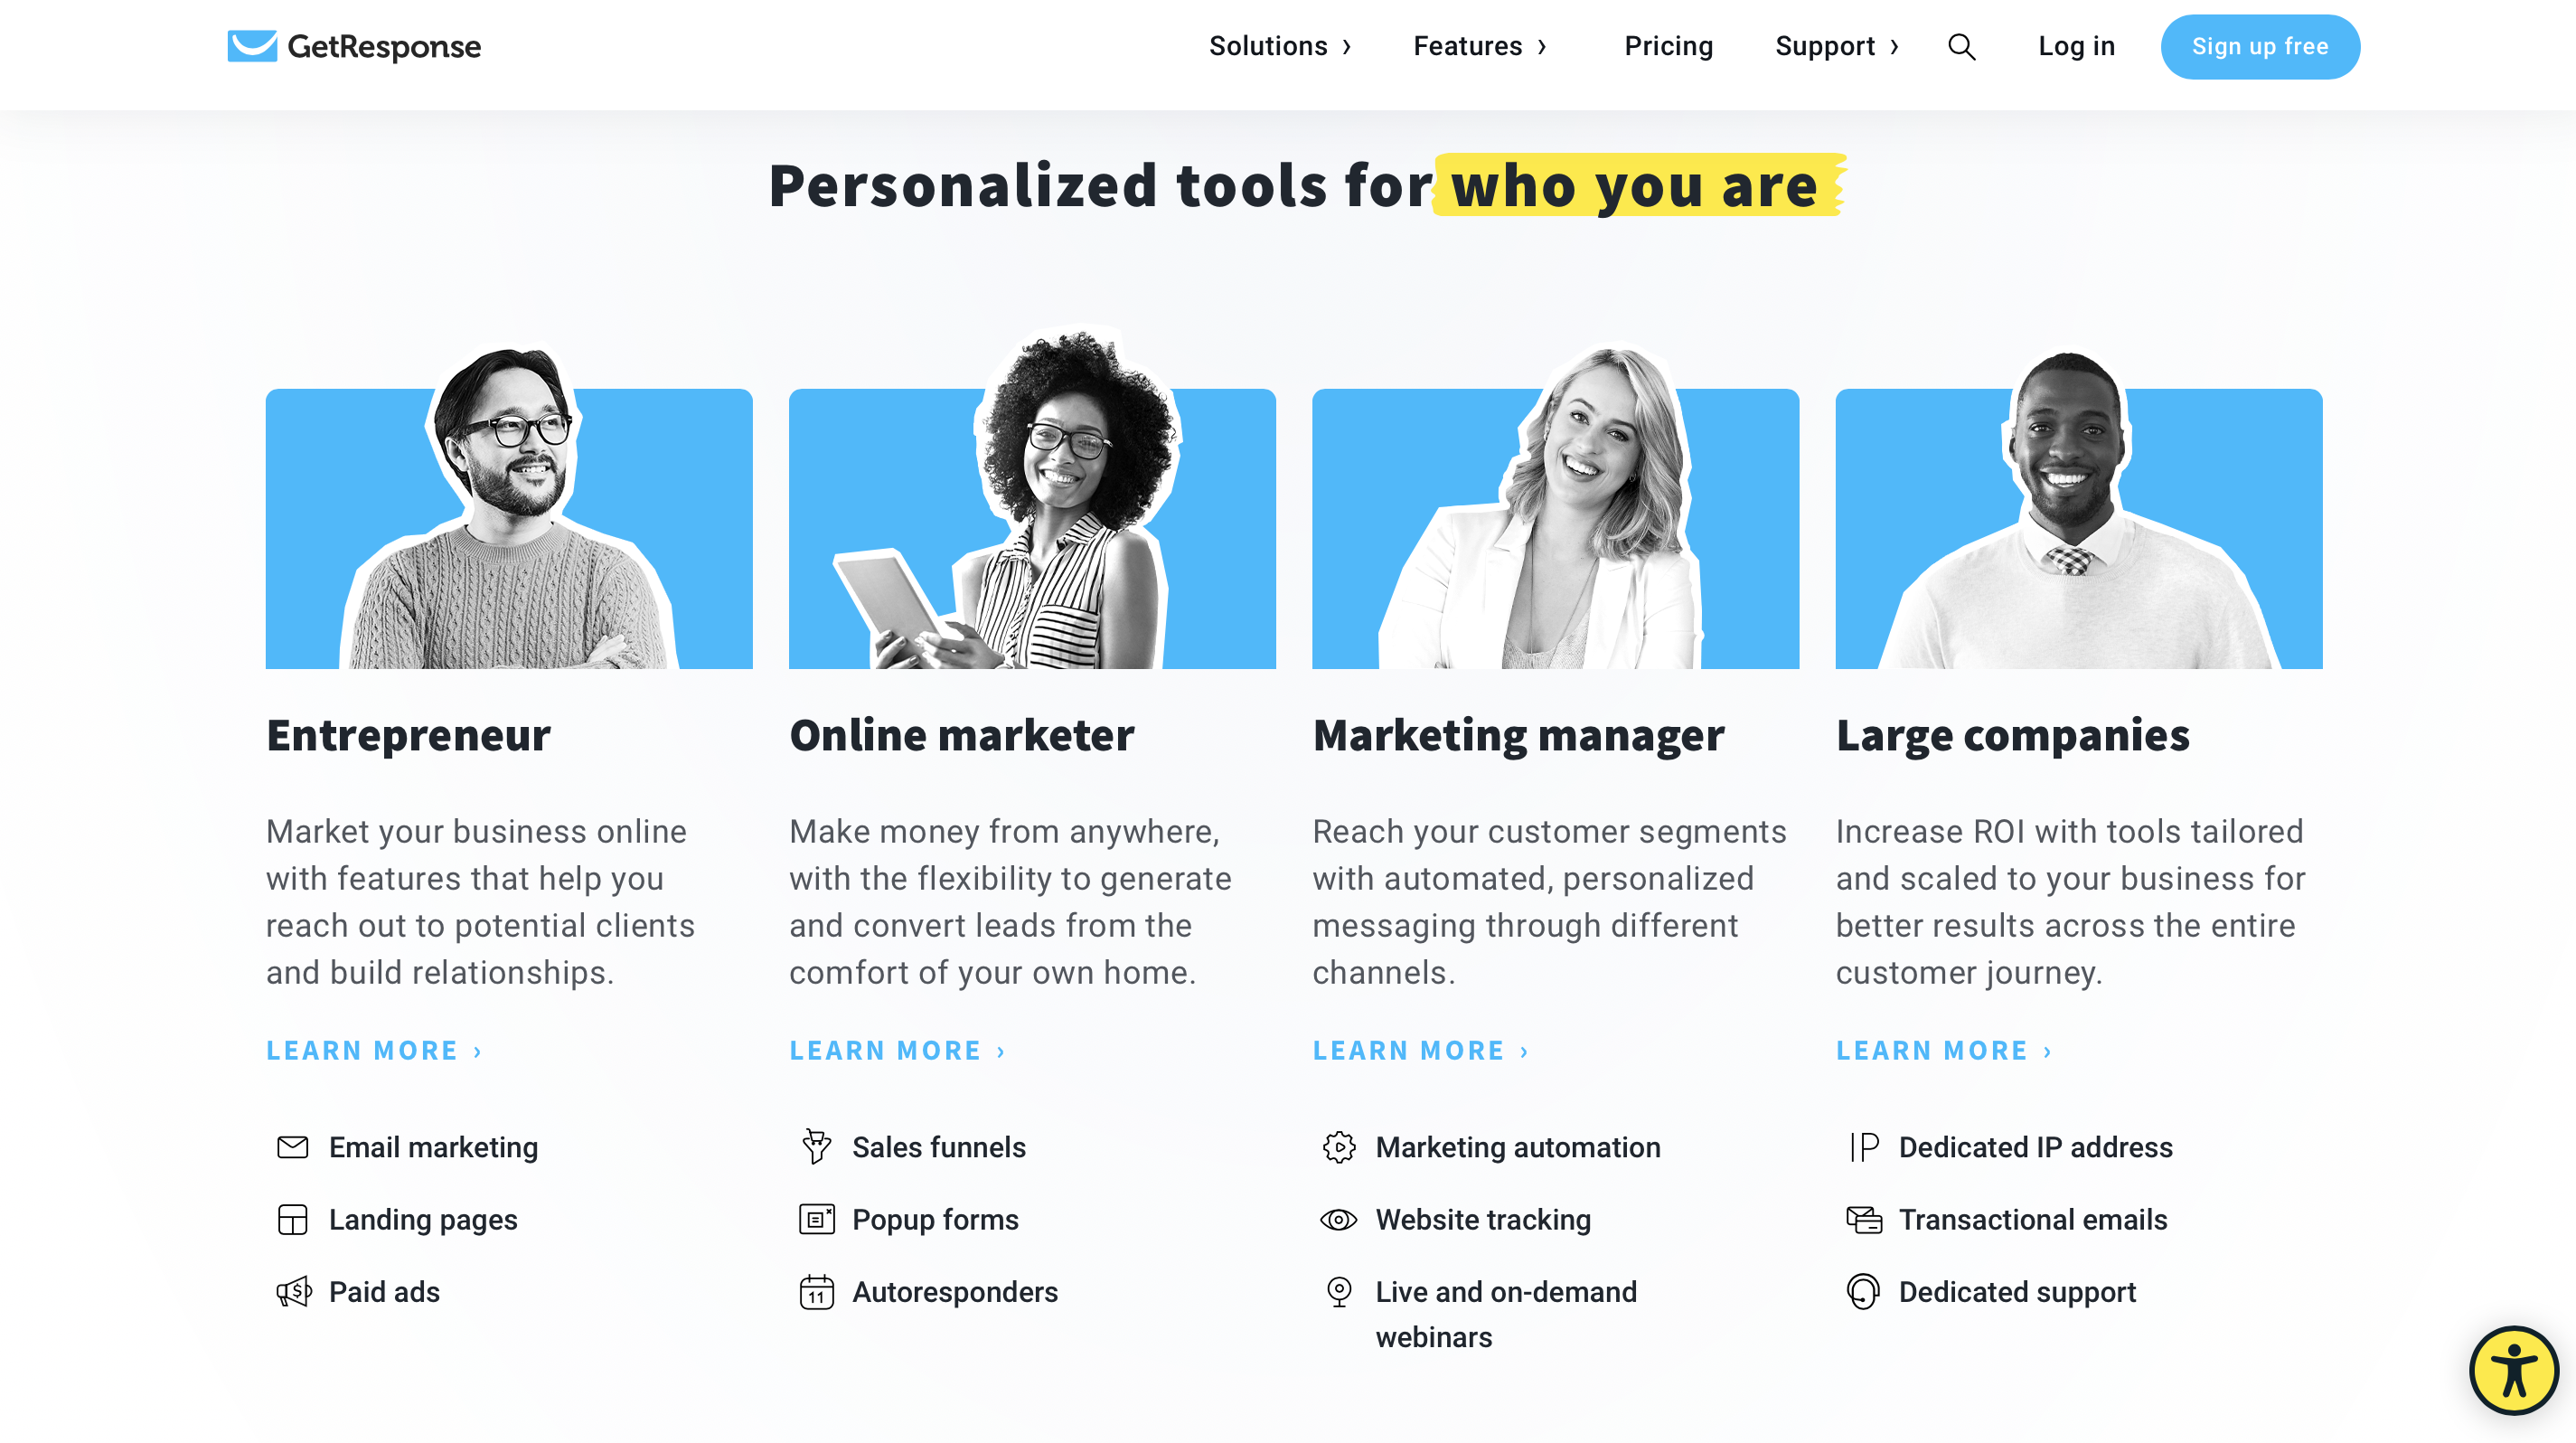 GetResponse Homepage Personalized tools for you section